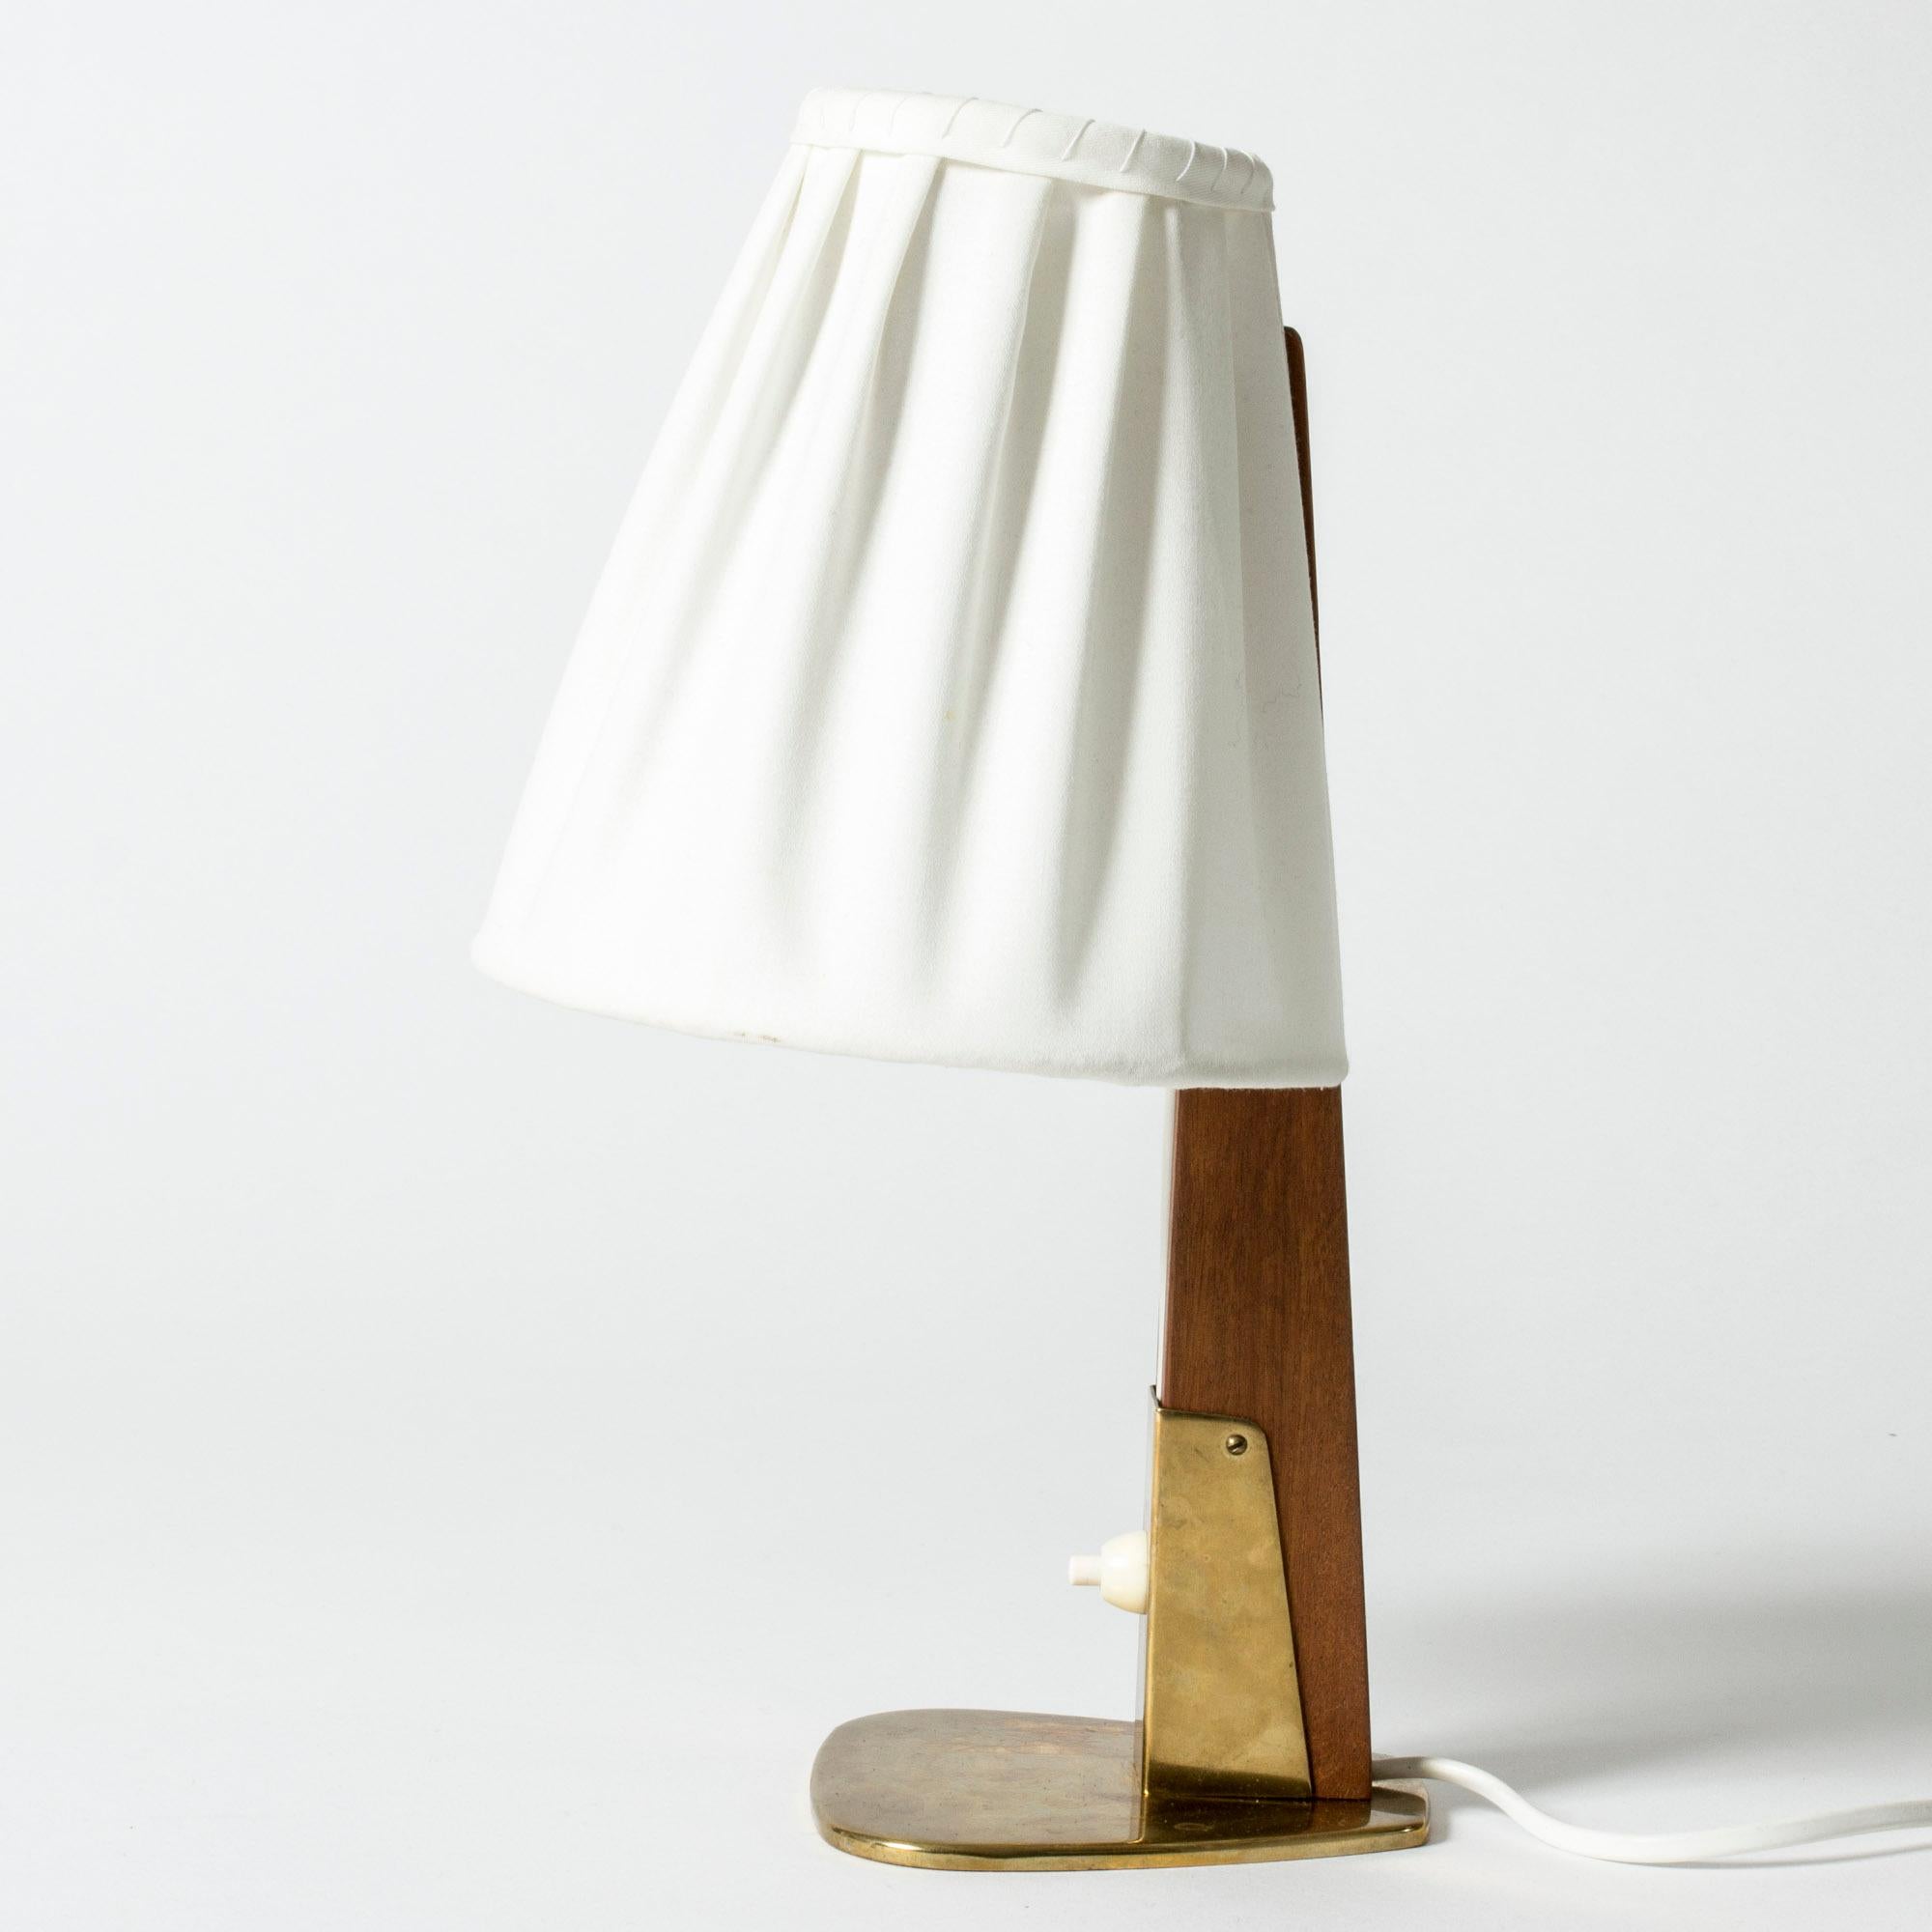 Neat table lamp by Hans Bergström for ASEA, made from brass with a teak stem, pleated white shade. The electrical cord runs visibly through the wood, an elegant detail. Wide brass base.